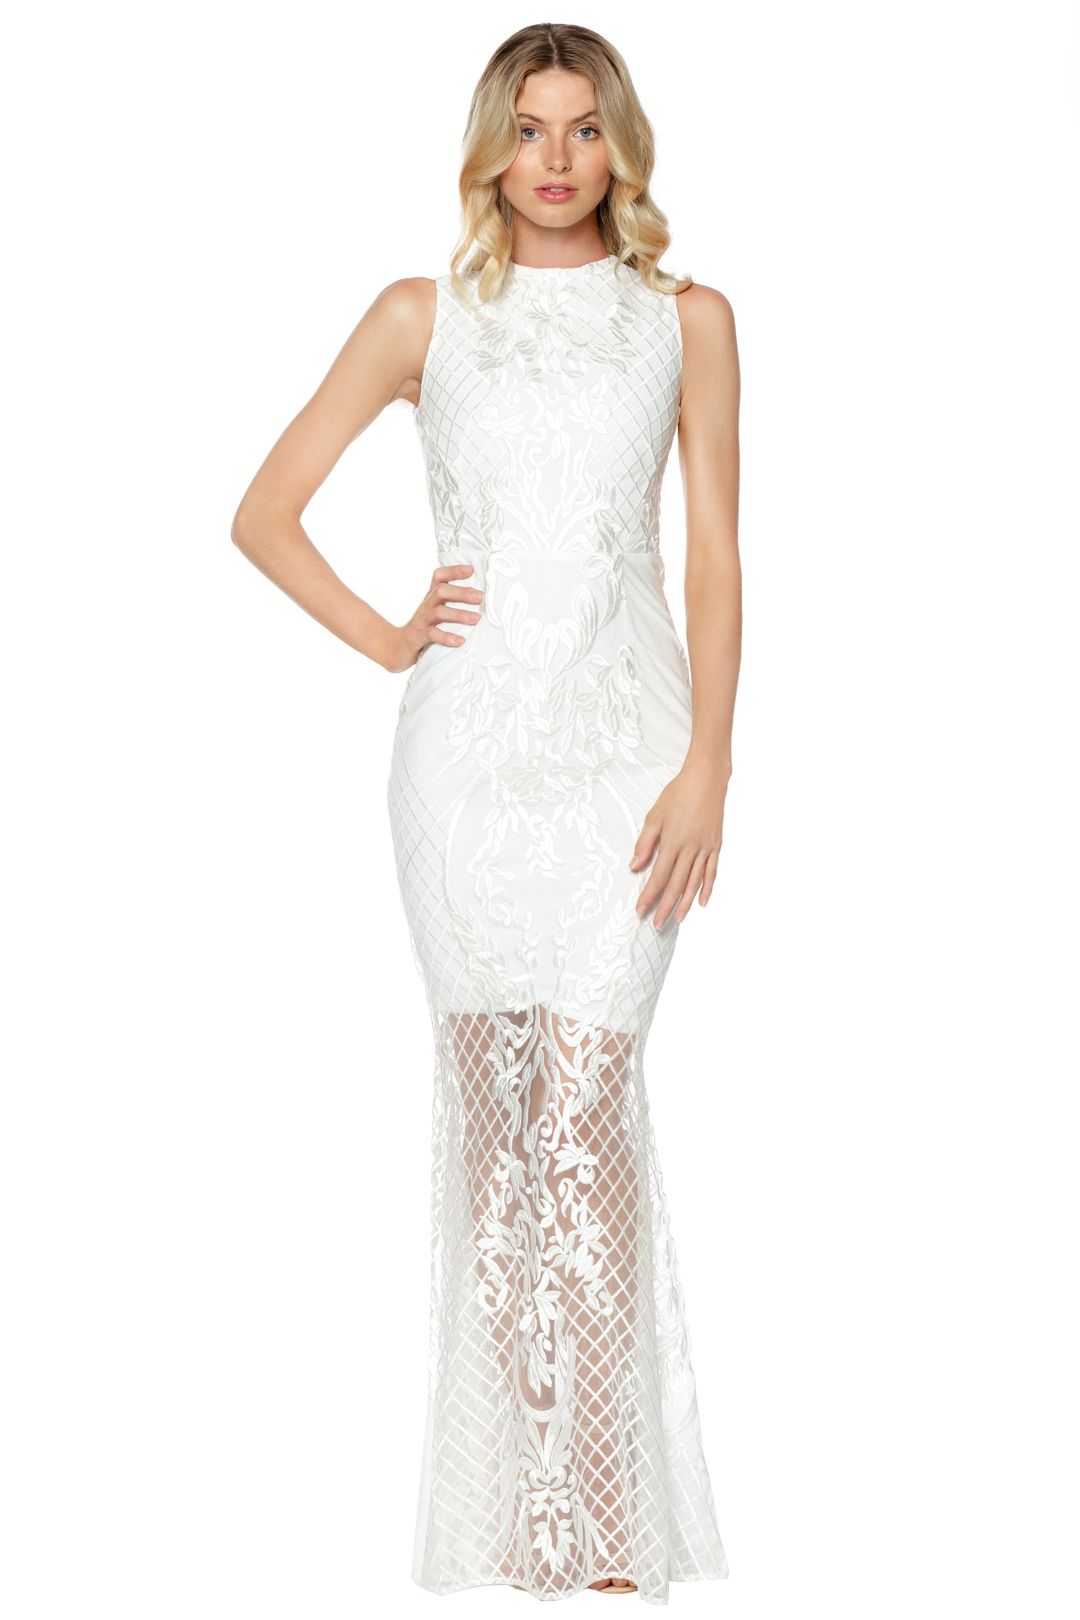 Grace and Hart - Ignite Passion Gown - White - Front